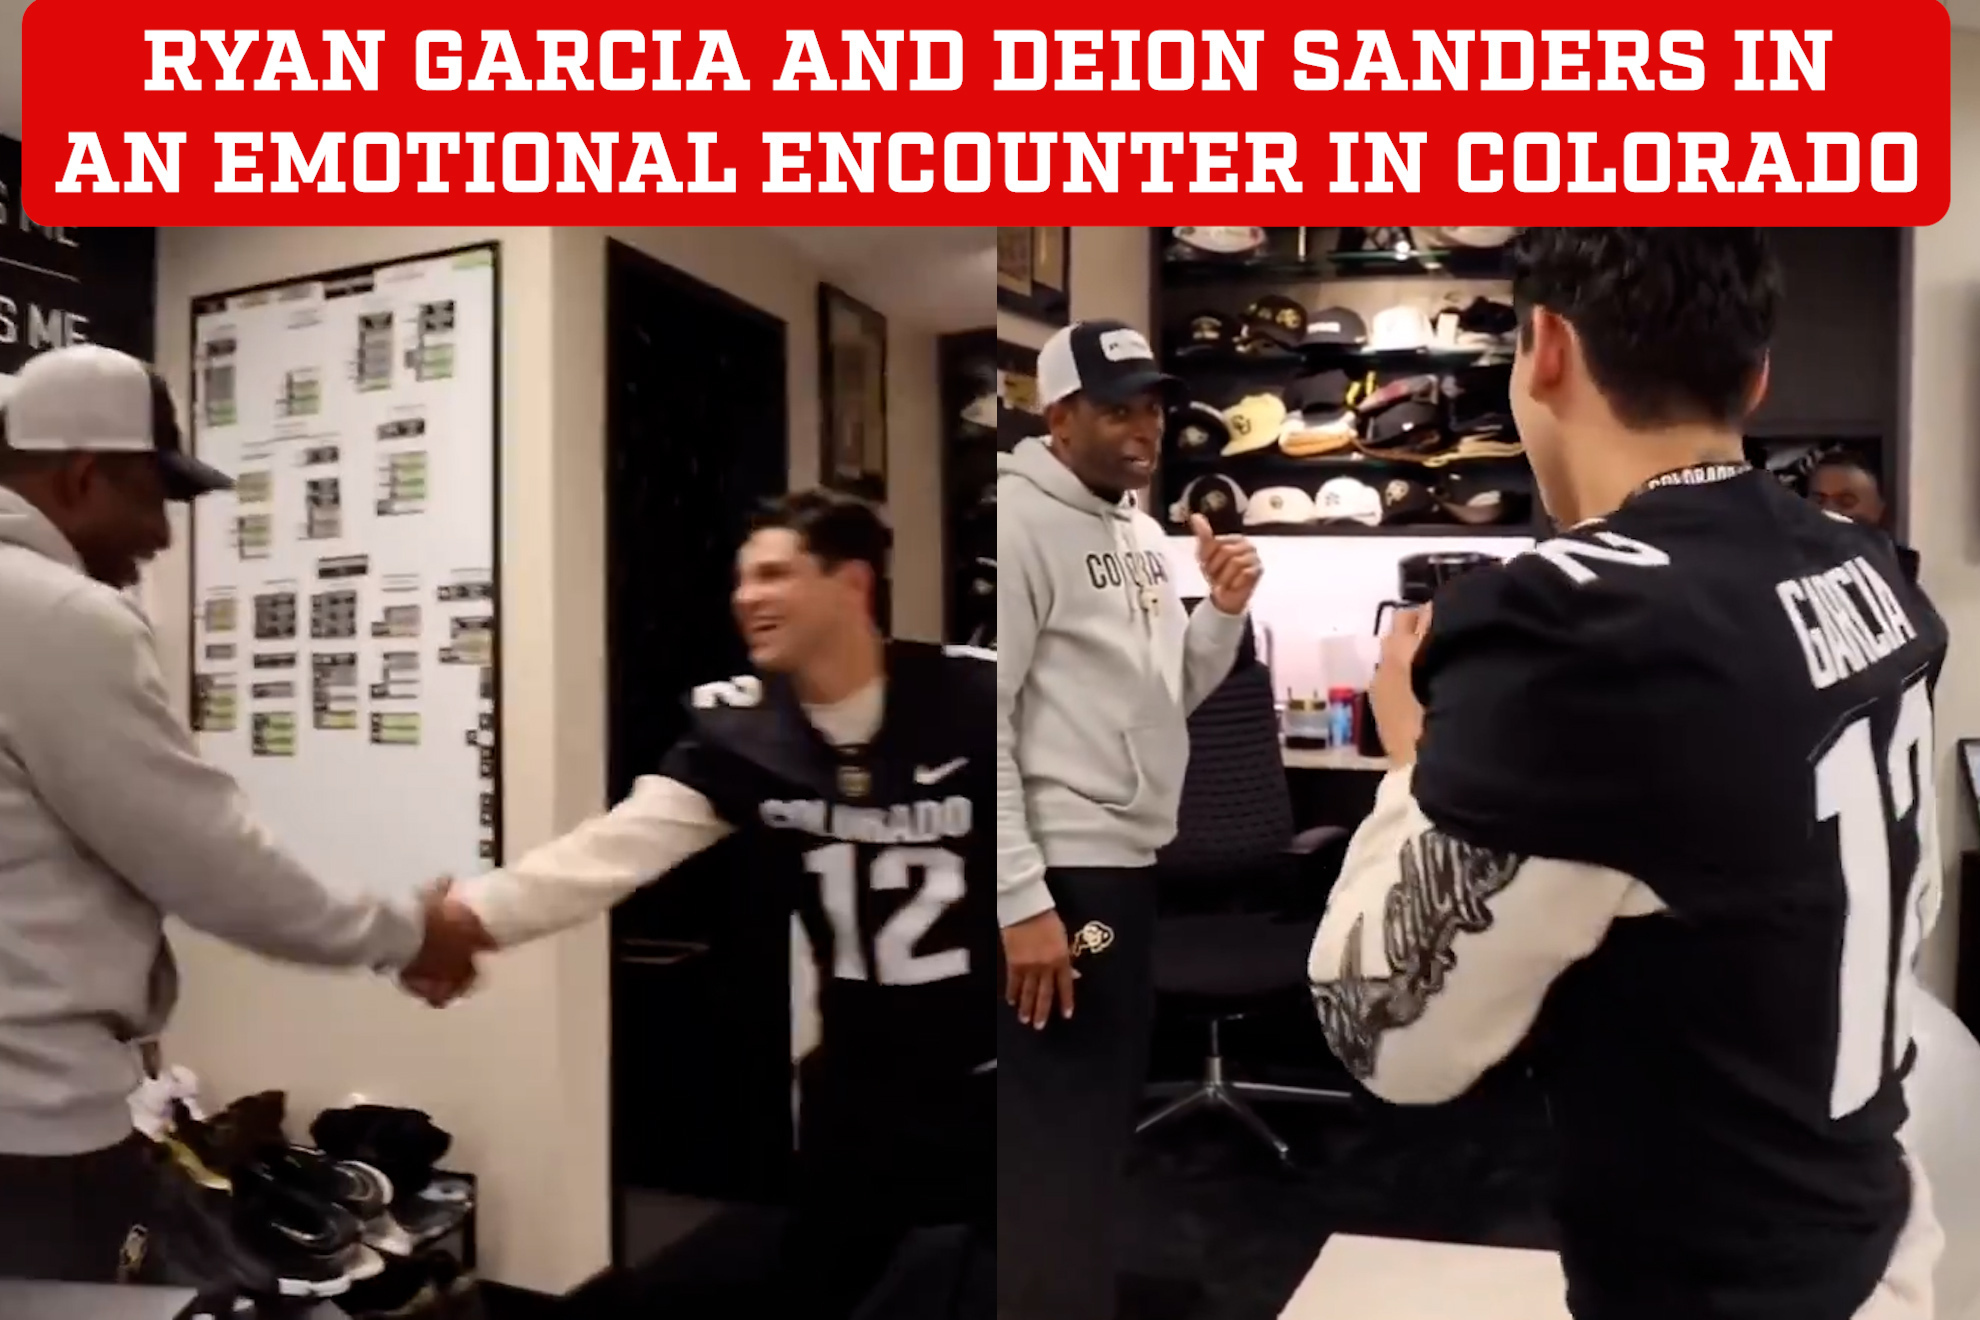 Ryan Garcia and Deion Sanders finally meet with a wholesome interaction in Colorado